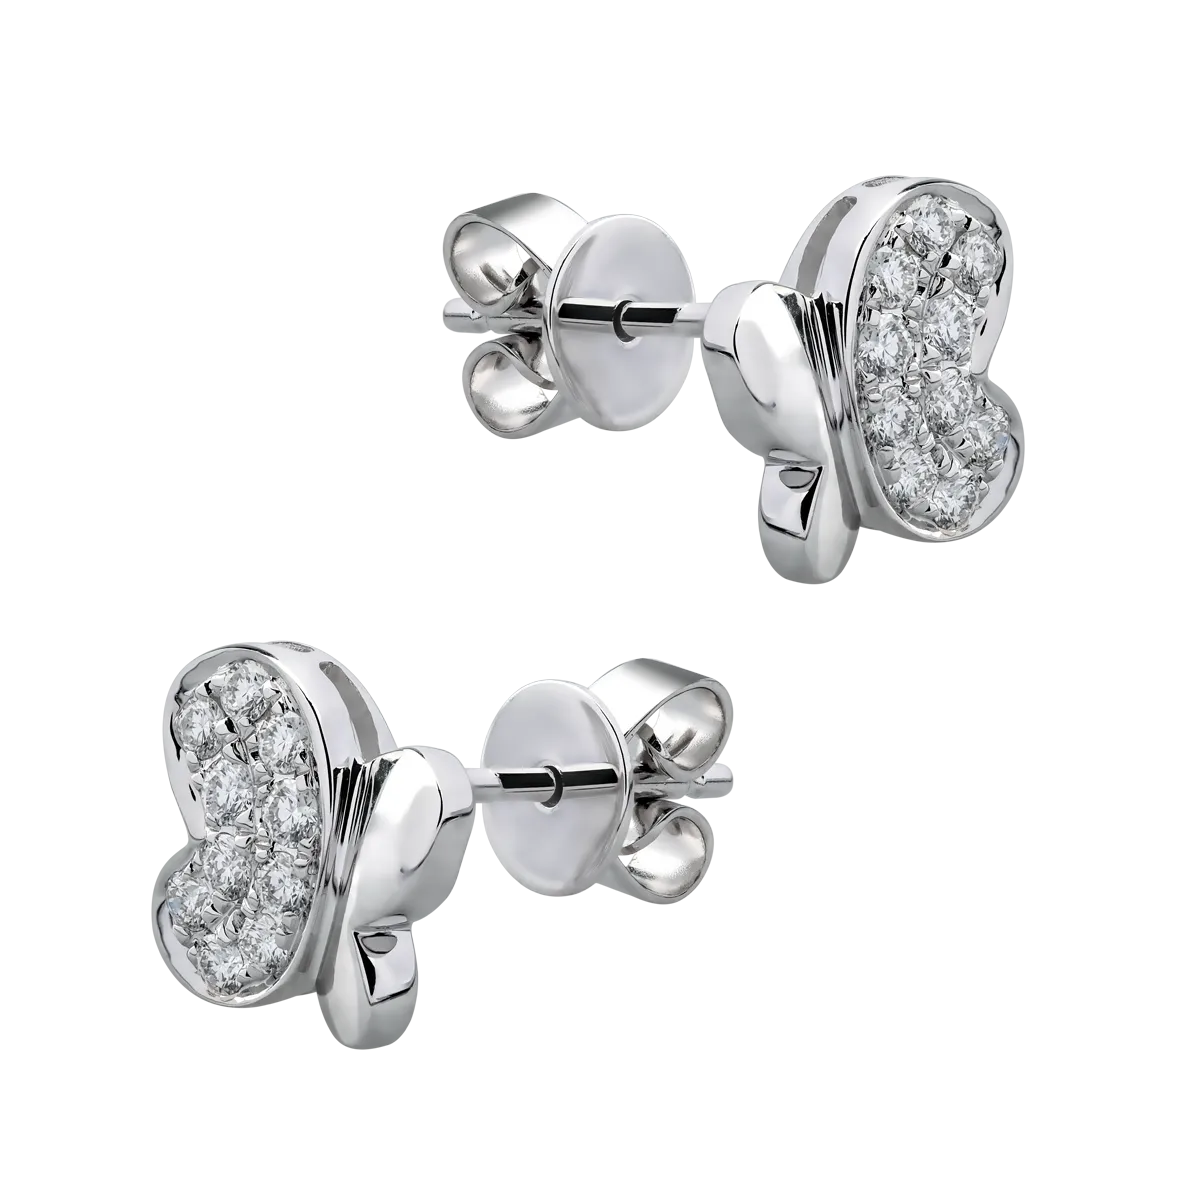 18K white gold earrings with 0.25ct diamonds